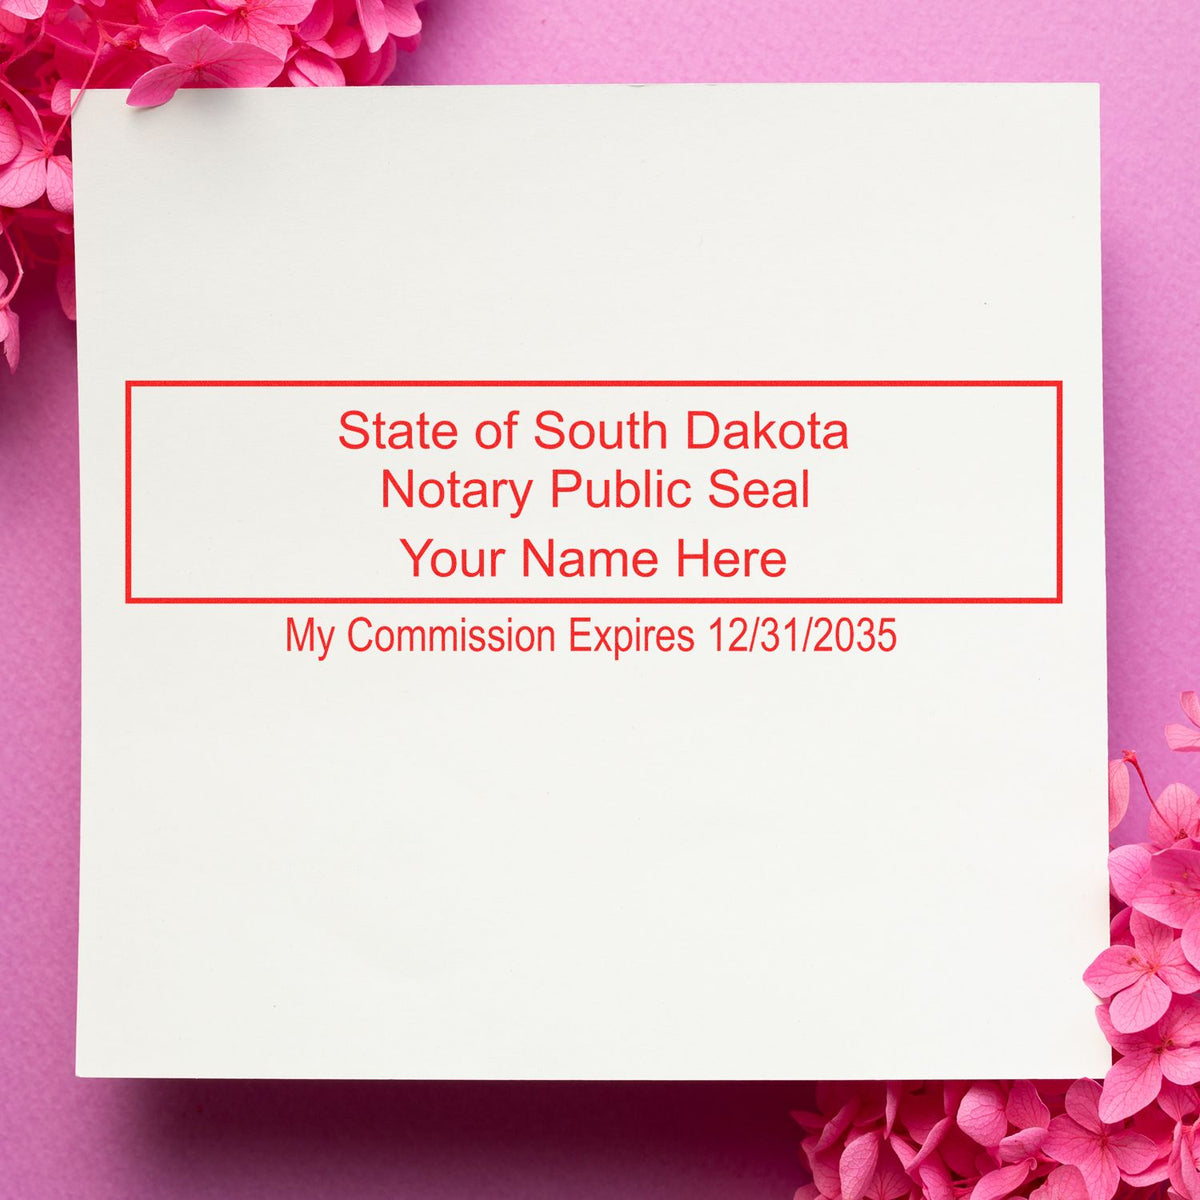 The Heavy-Duty South Dakota Rectangular Notary Stamp stamp impression comes to life with a crisp, detailed photo on paper - showcasing true professional quality.